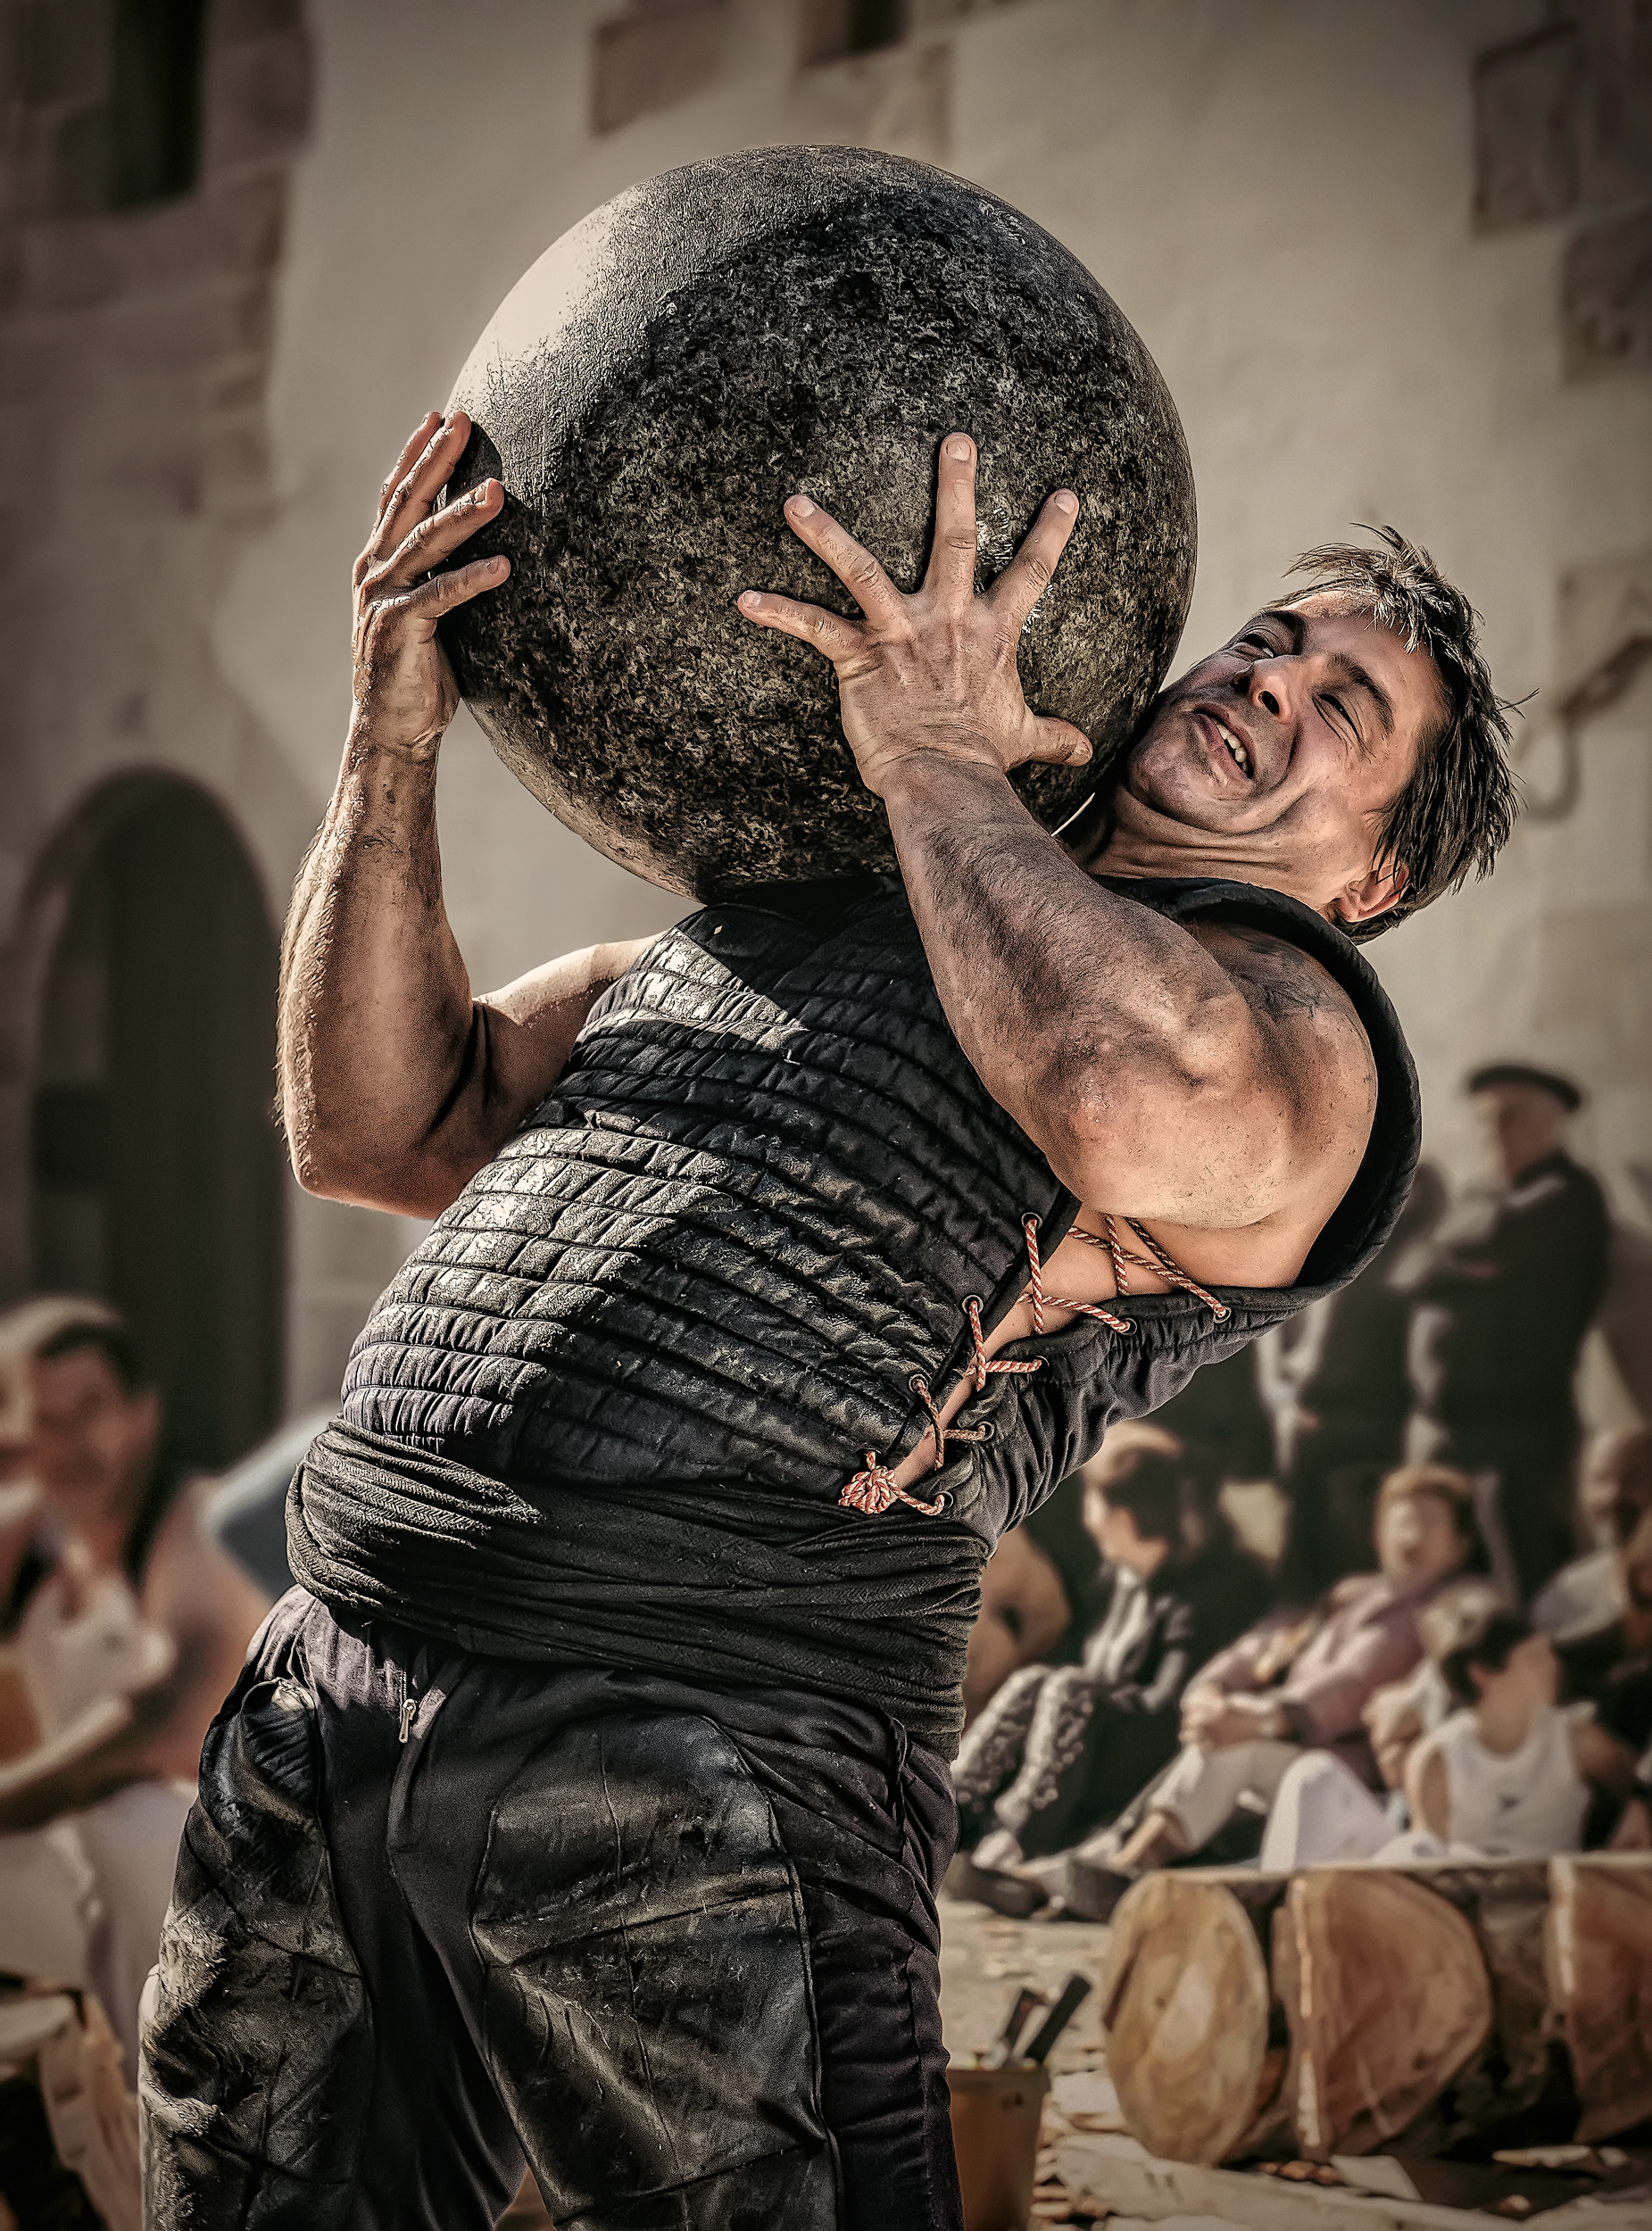 A traditional basque sportsman lifting a round stone.